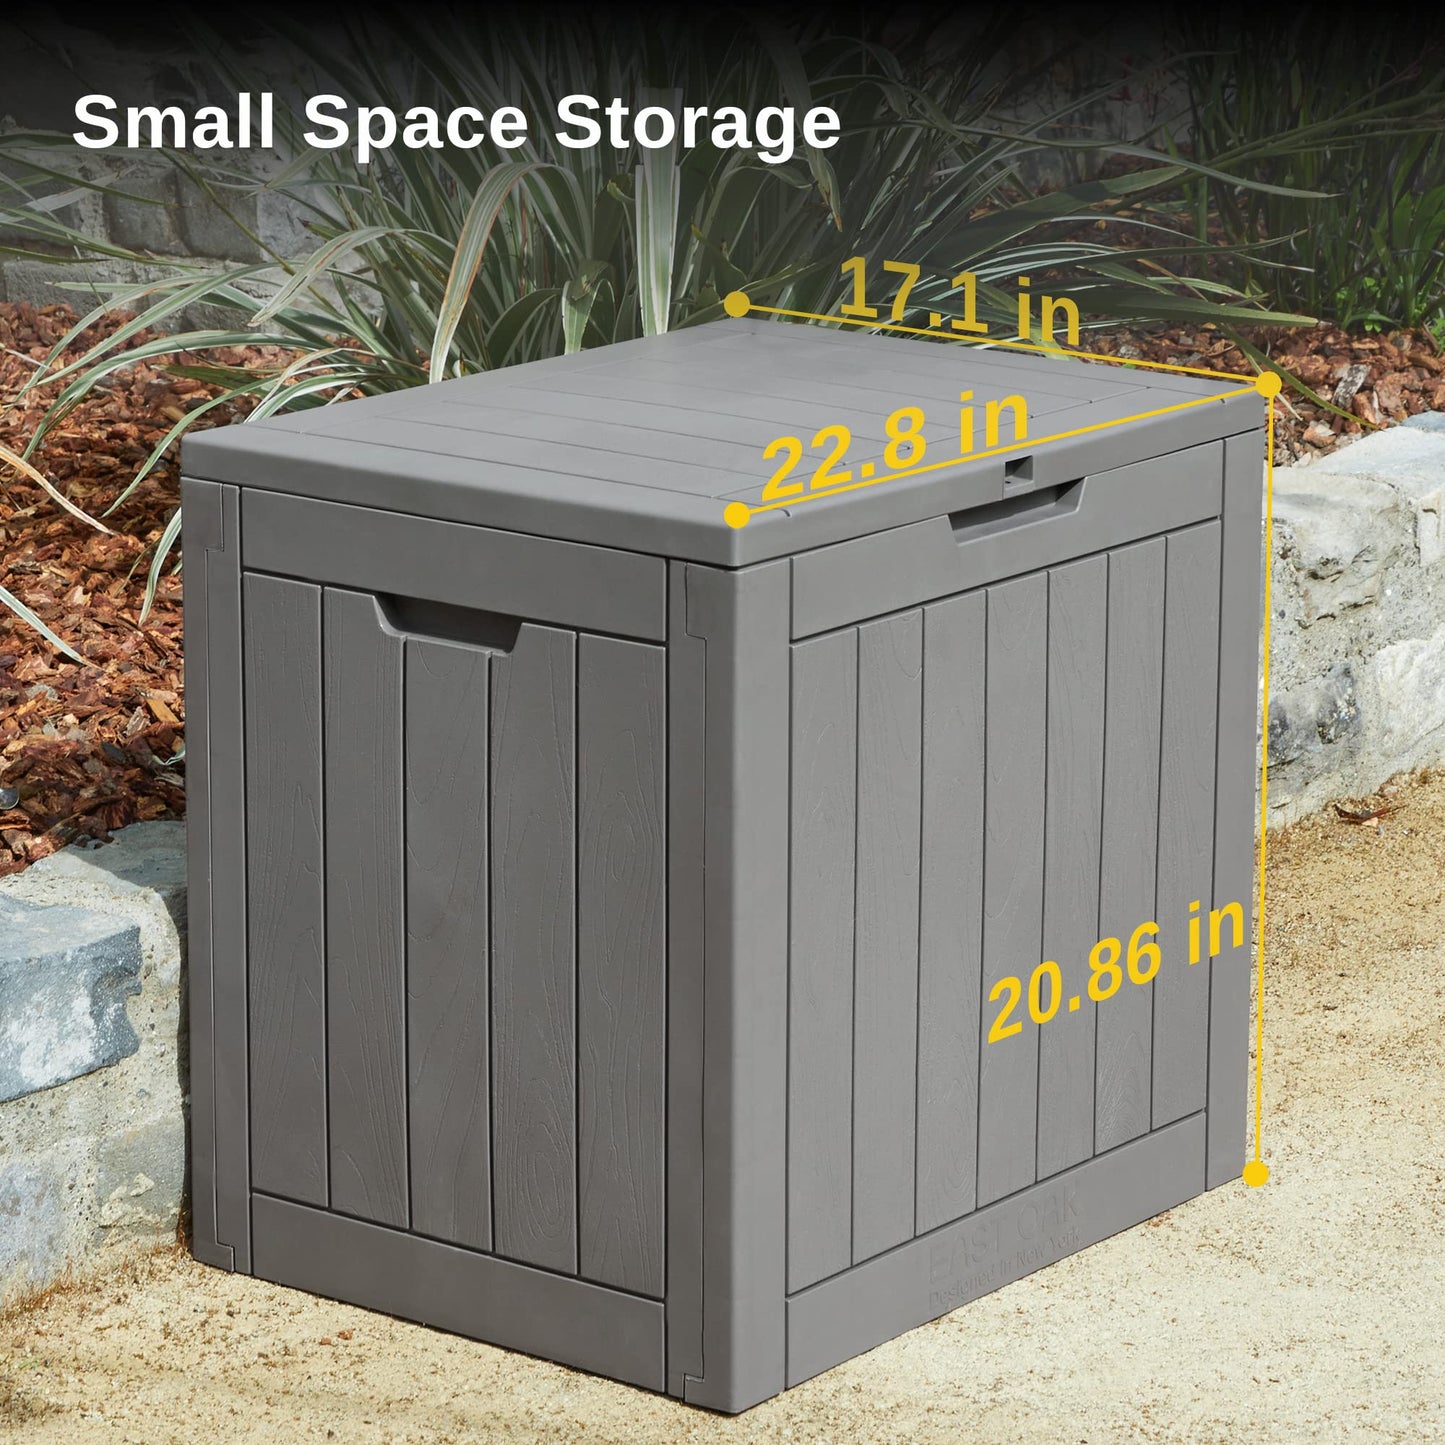 Boho Storage Box: 31 Gallon Waterproof Deck Box - Ideal for Patio Cushions, Gardening Tools, and Outdoor Toys - Lockable, UV Resistant - Stylish Storage Solution!